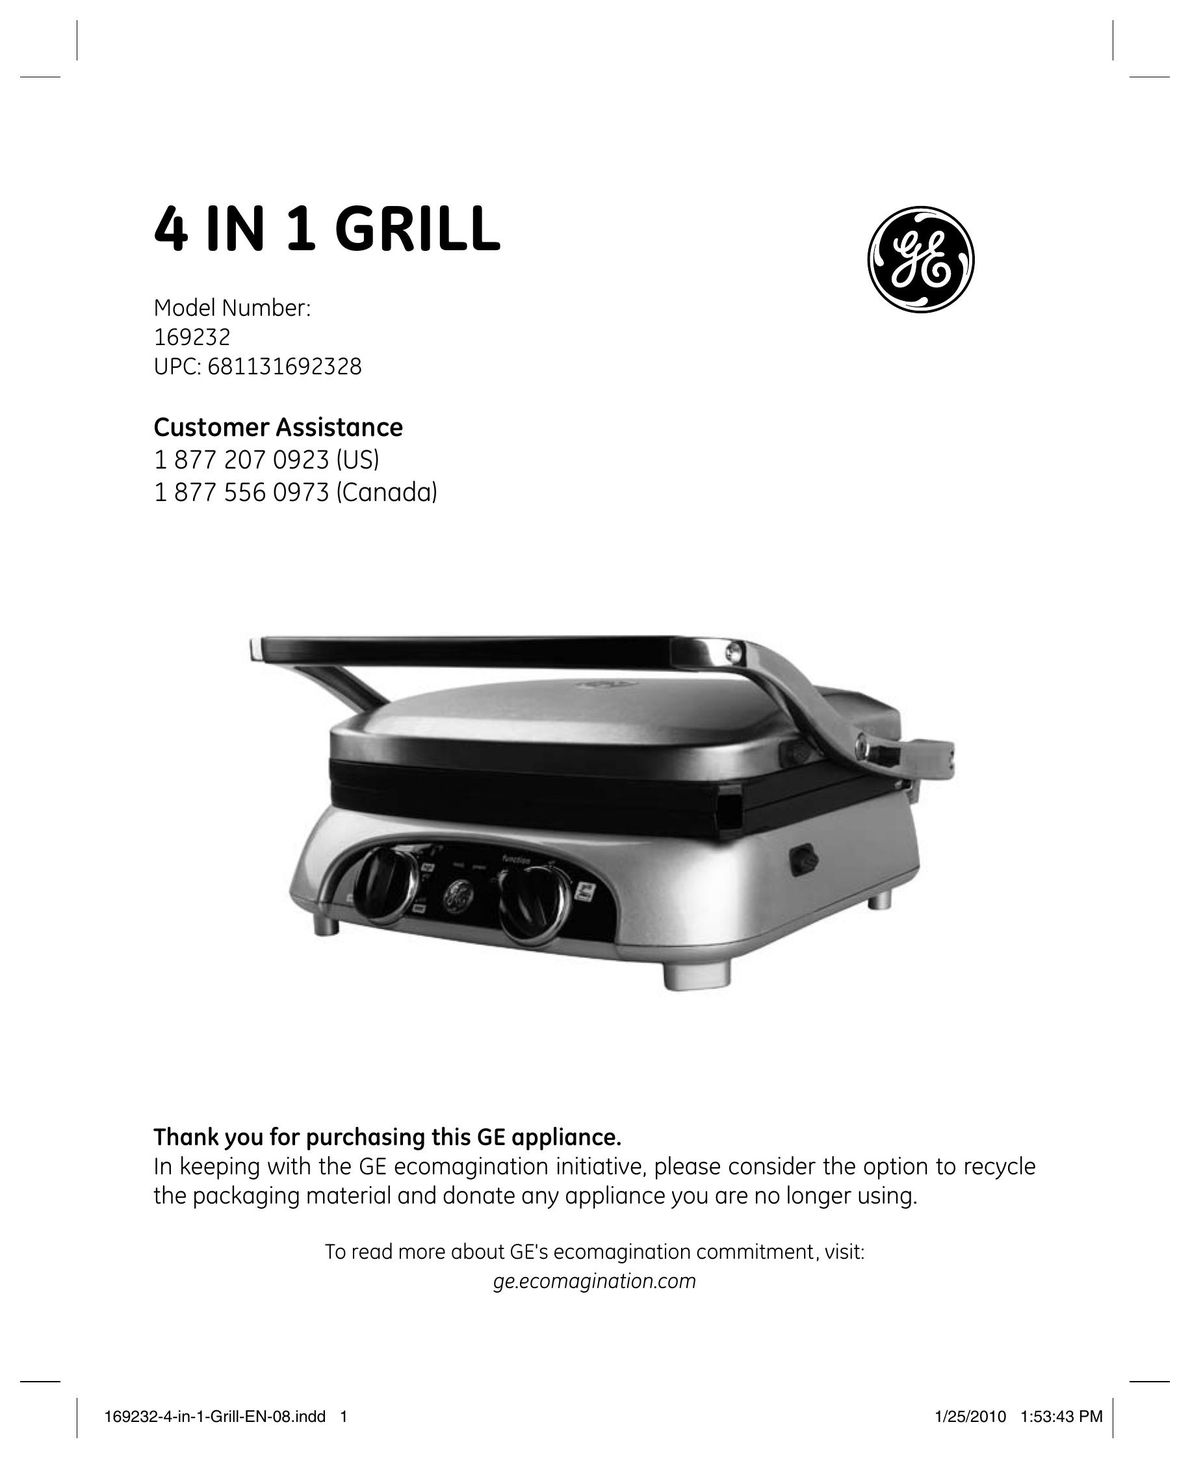 GE 681131692328 Kitchen Grill User Manual